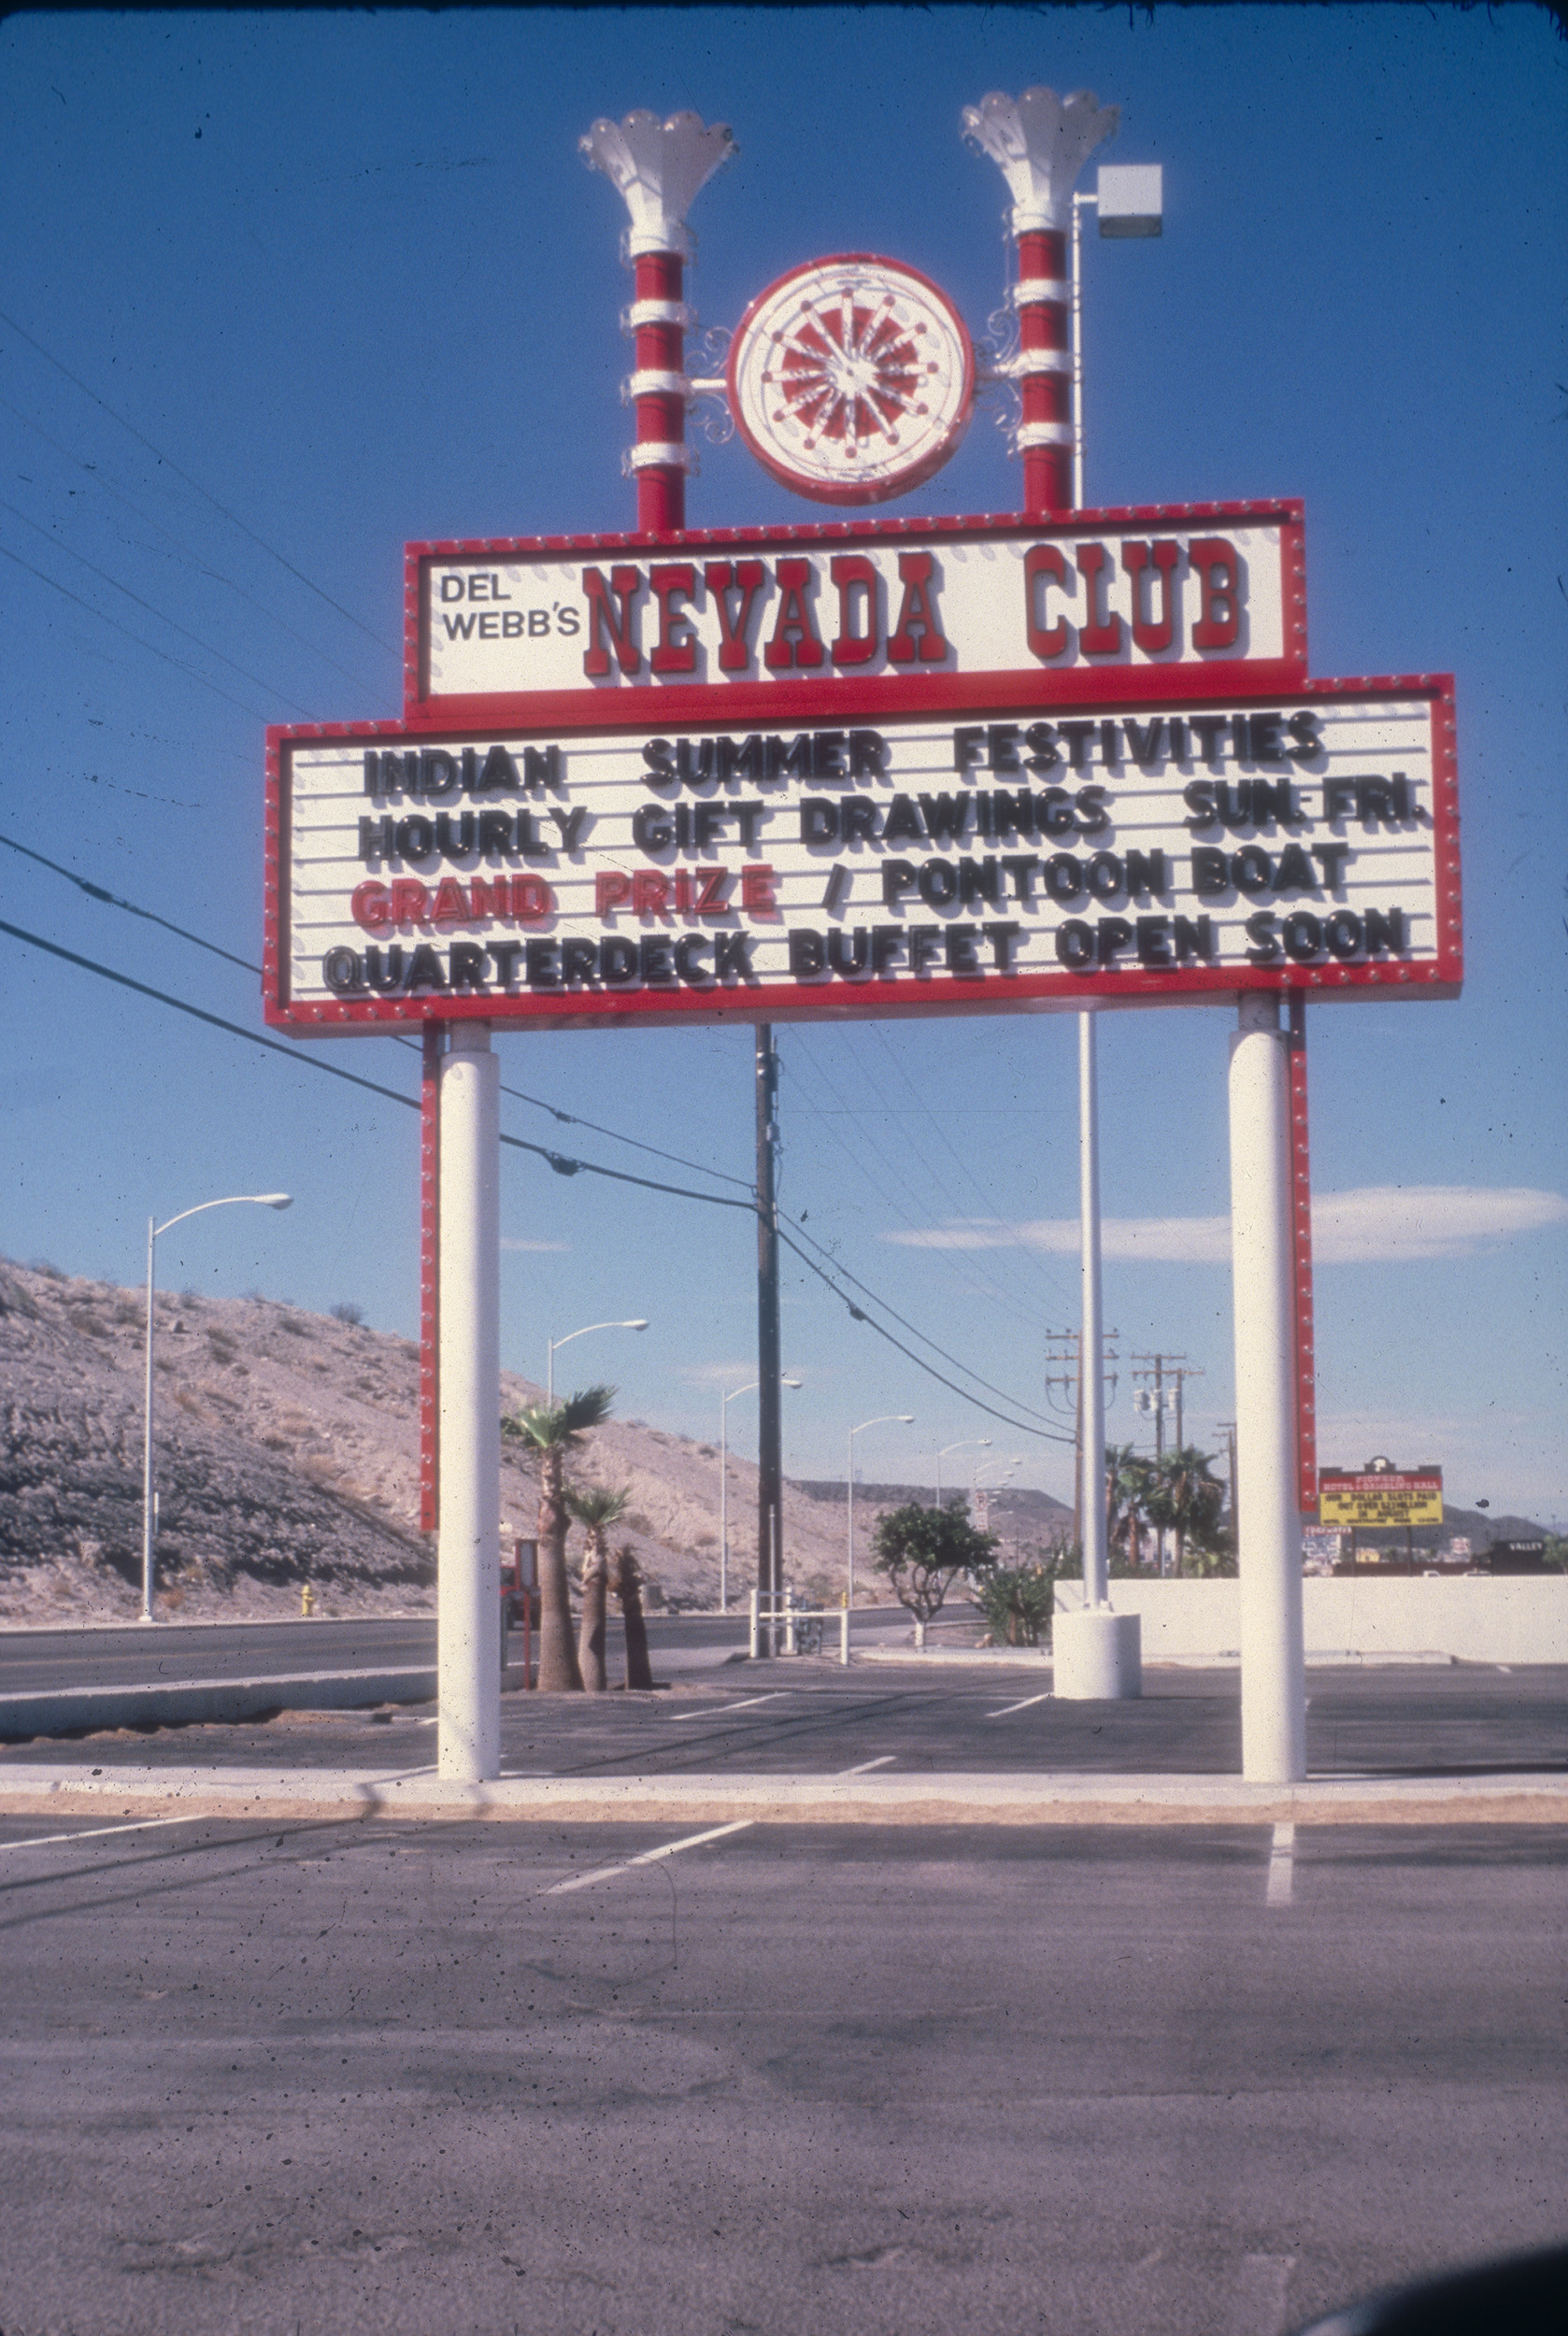 Slide of the neon sign for the Nevada Club, Laughlin, Nevada, 1986